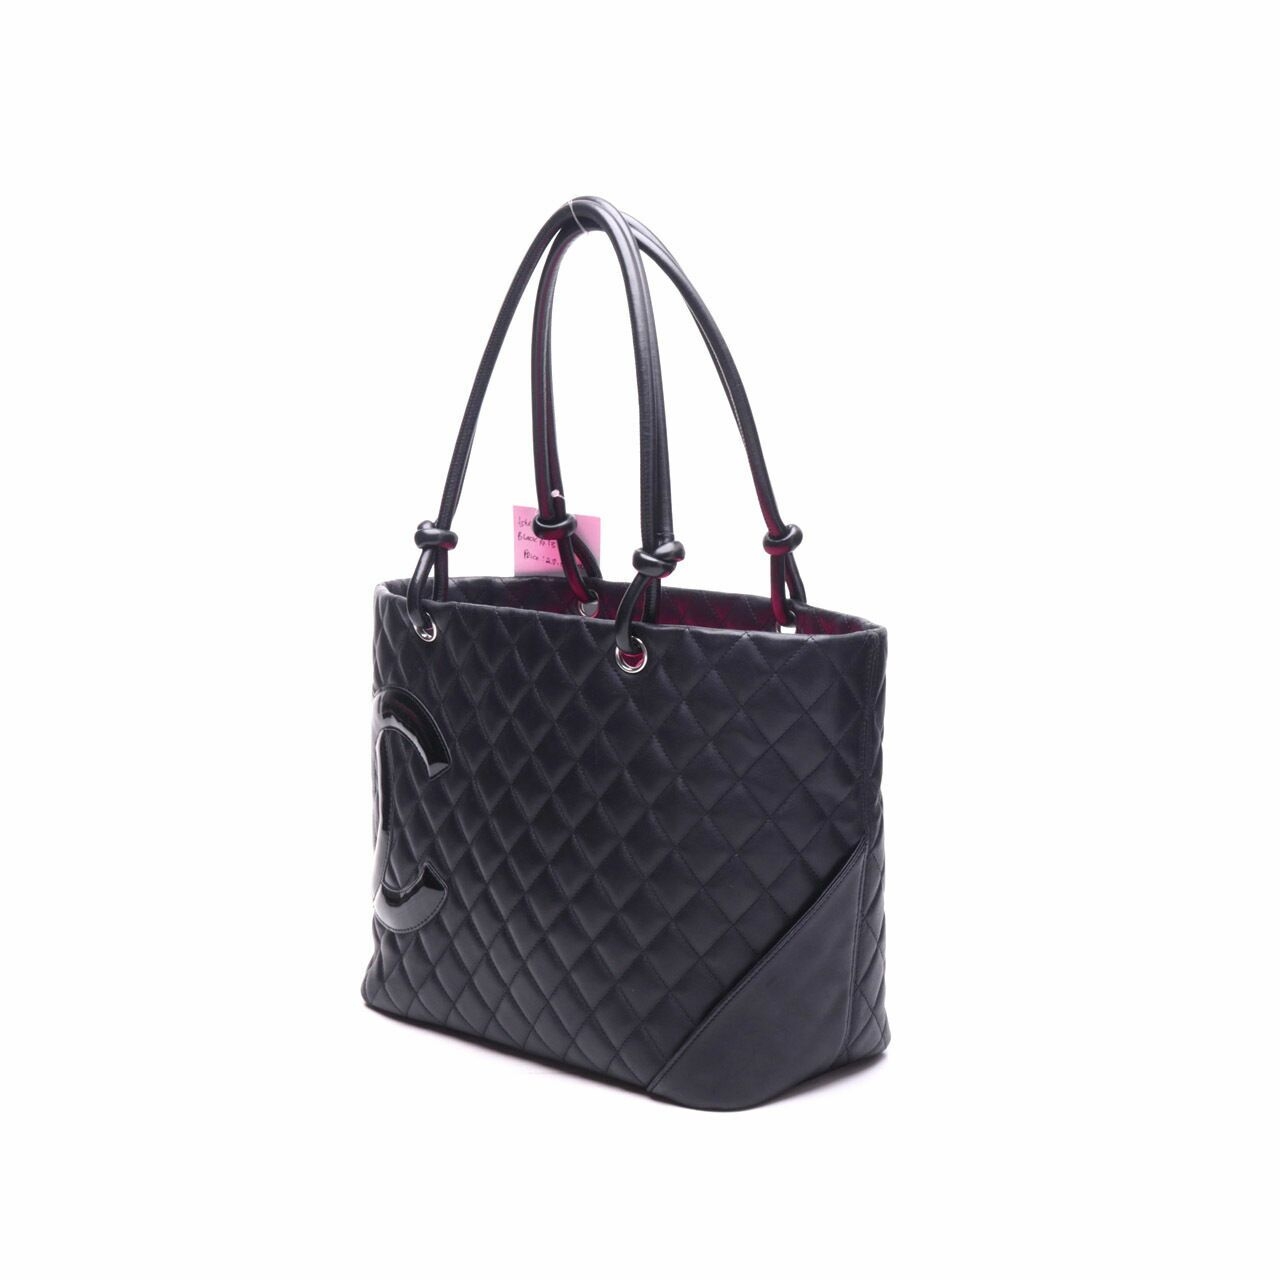 Chanel Black Quilted Leather Ligne Cambon Large Tote Bag